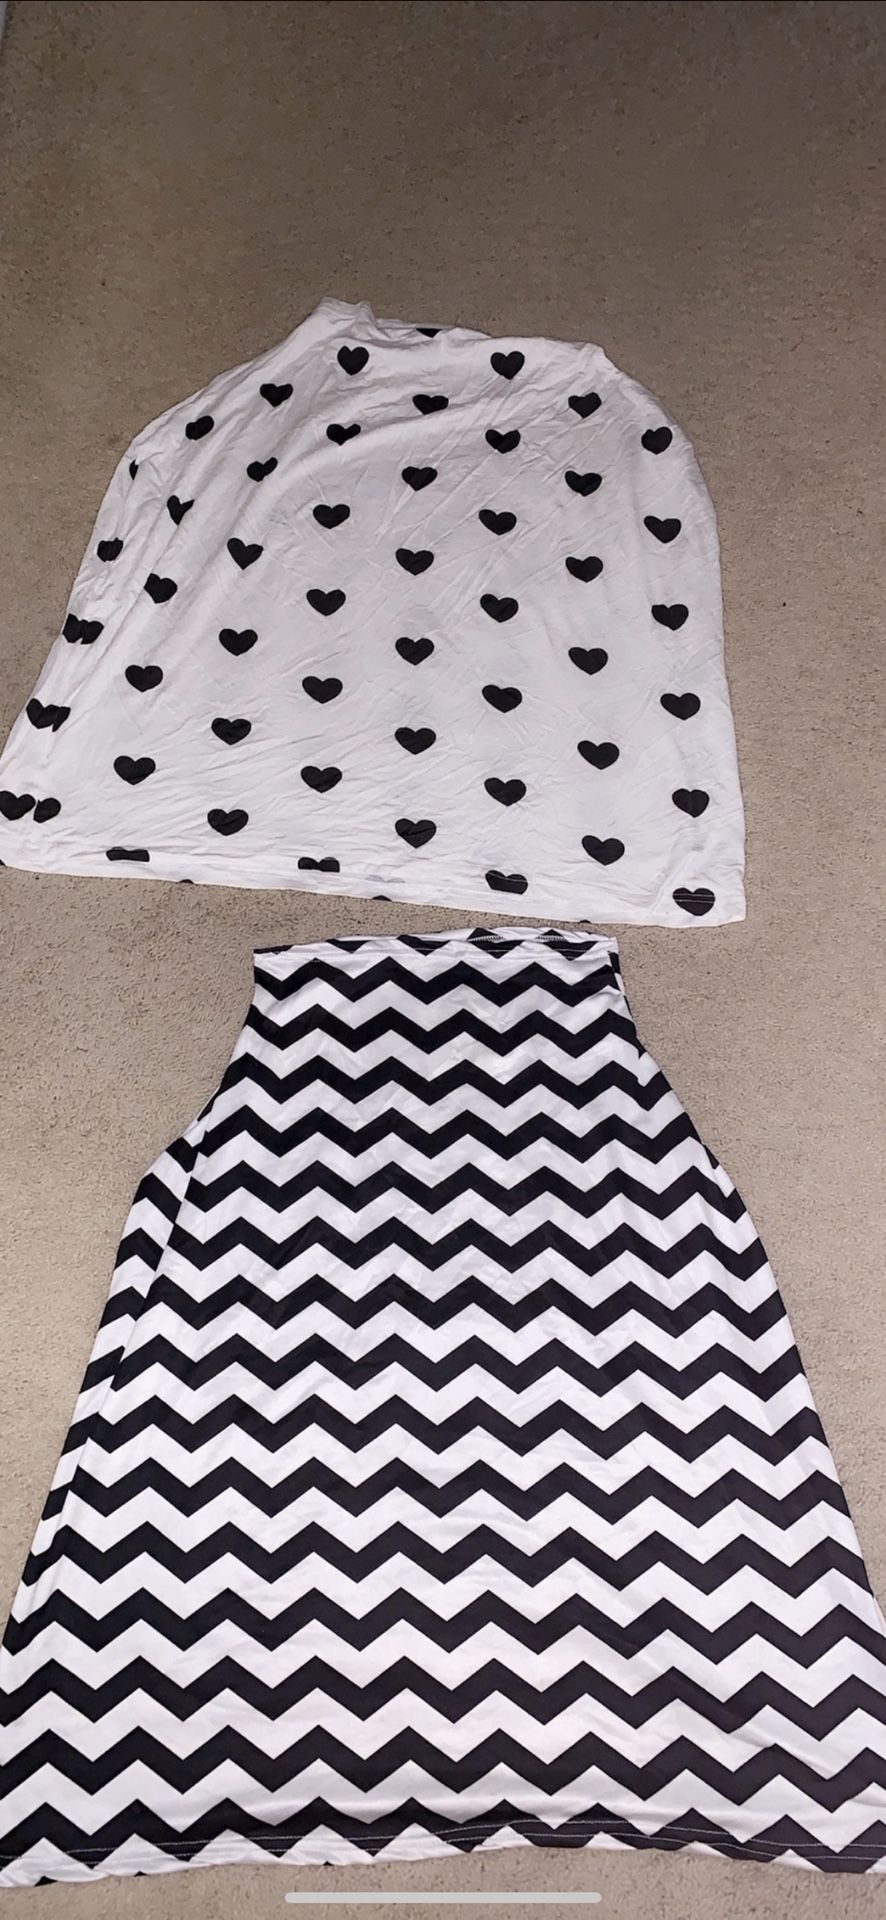 4-1 Stretchy Car seat Cover/nursing cover/high hair cover/grocery cart cover both the zig-zag & heart design for $25